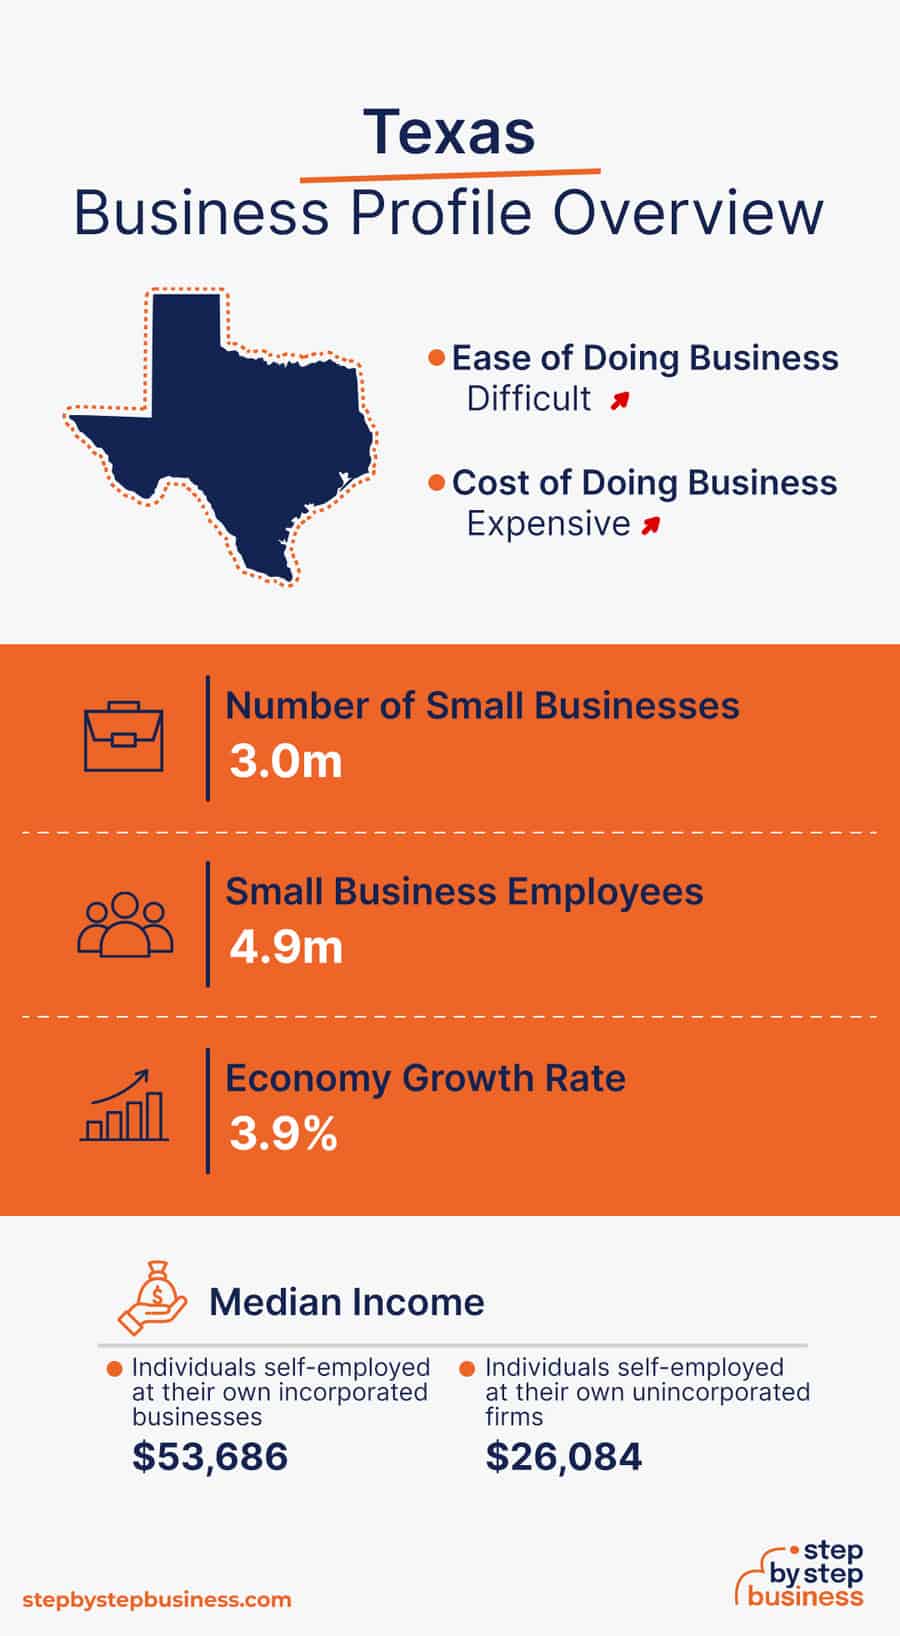 Texas Business Profile Overview